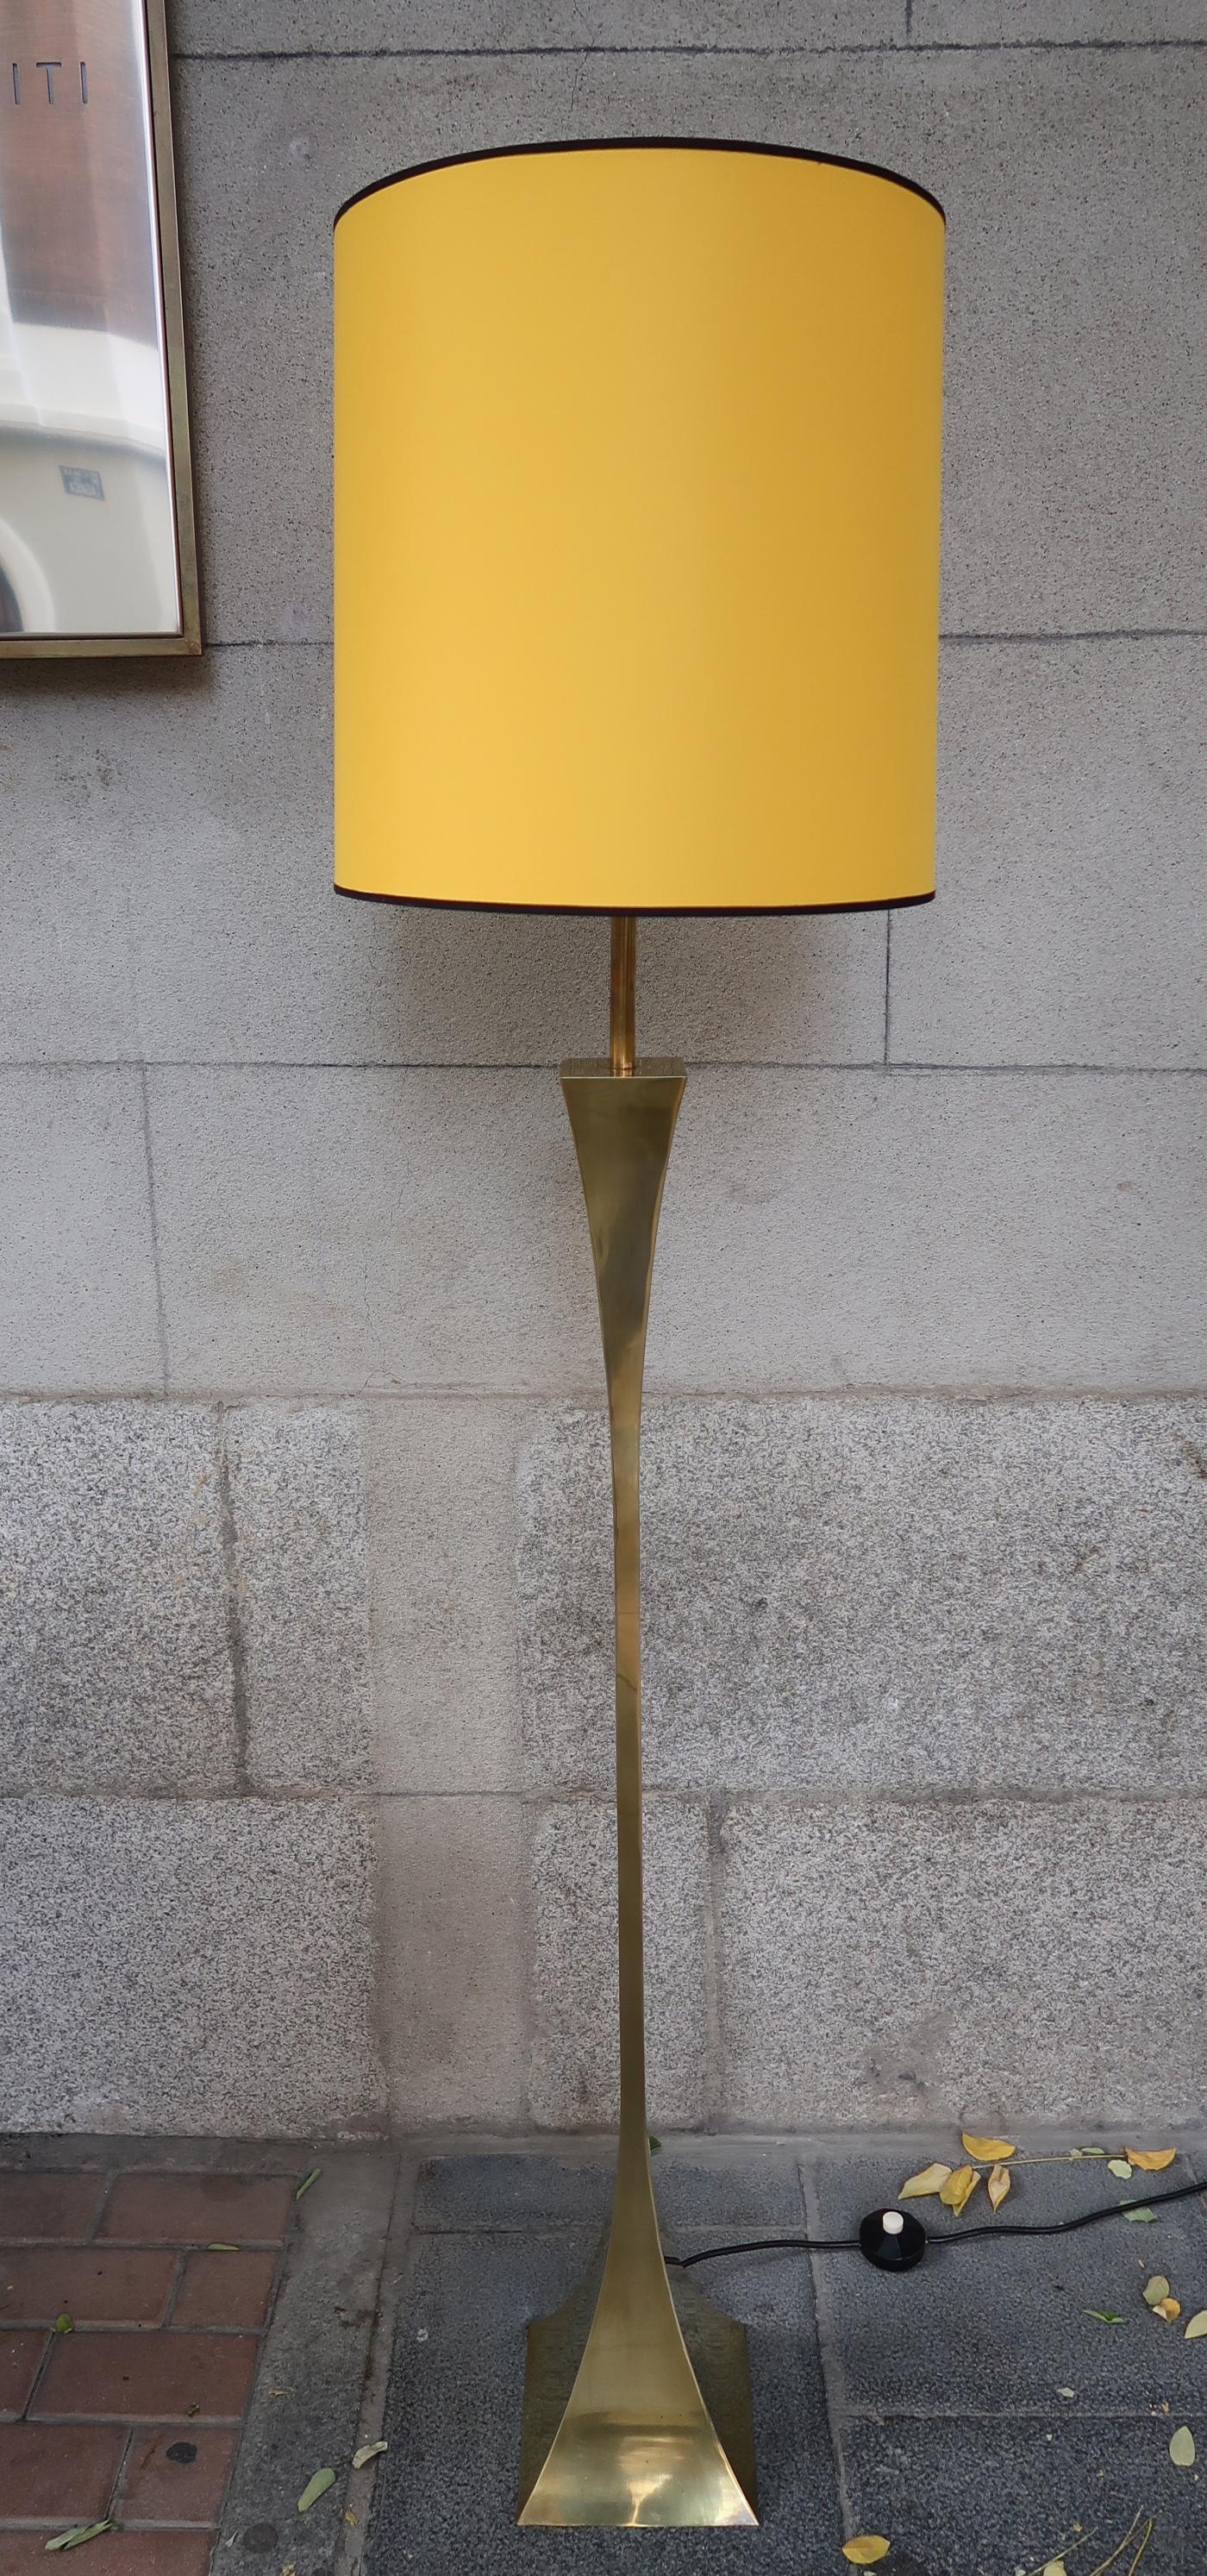 Montagna Grillo, Mod. Pyramid, Brass Midcentury Floor Lamp, Italy, 1970 In Good Condition For Sale In Madrid, ES